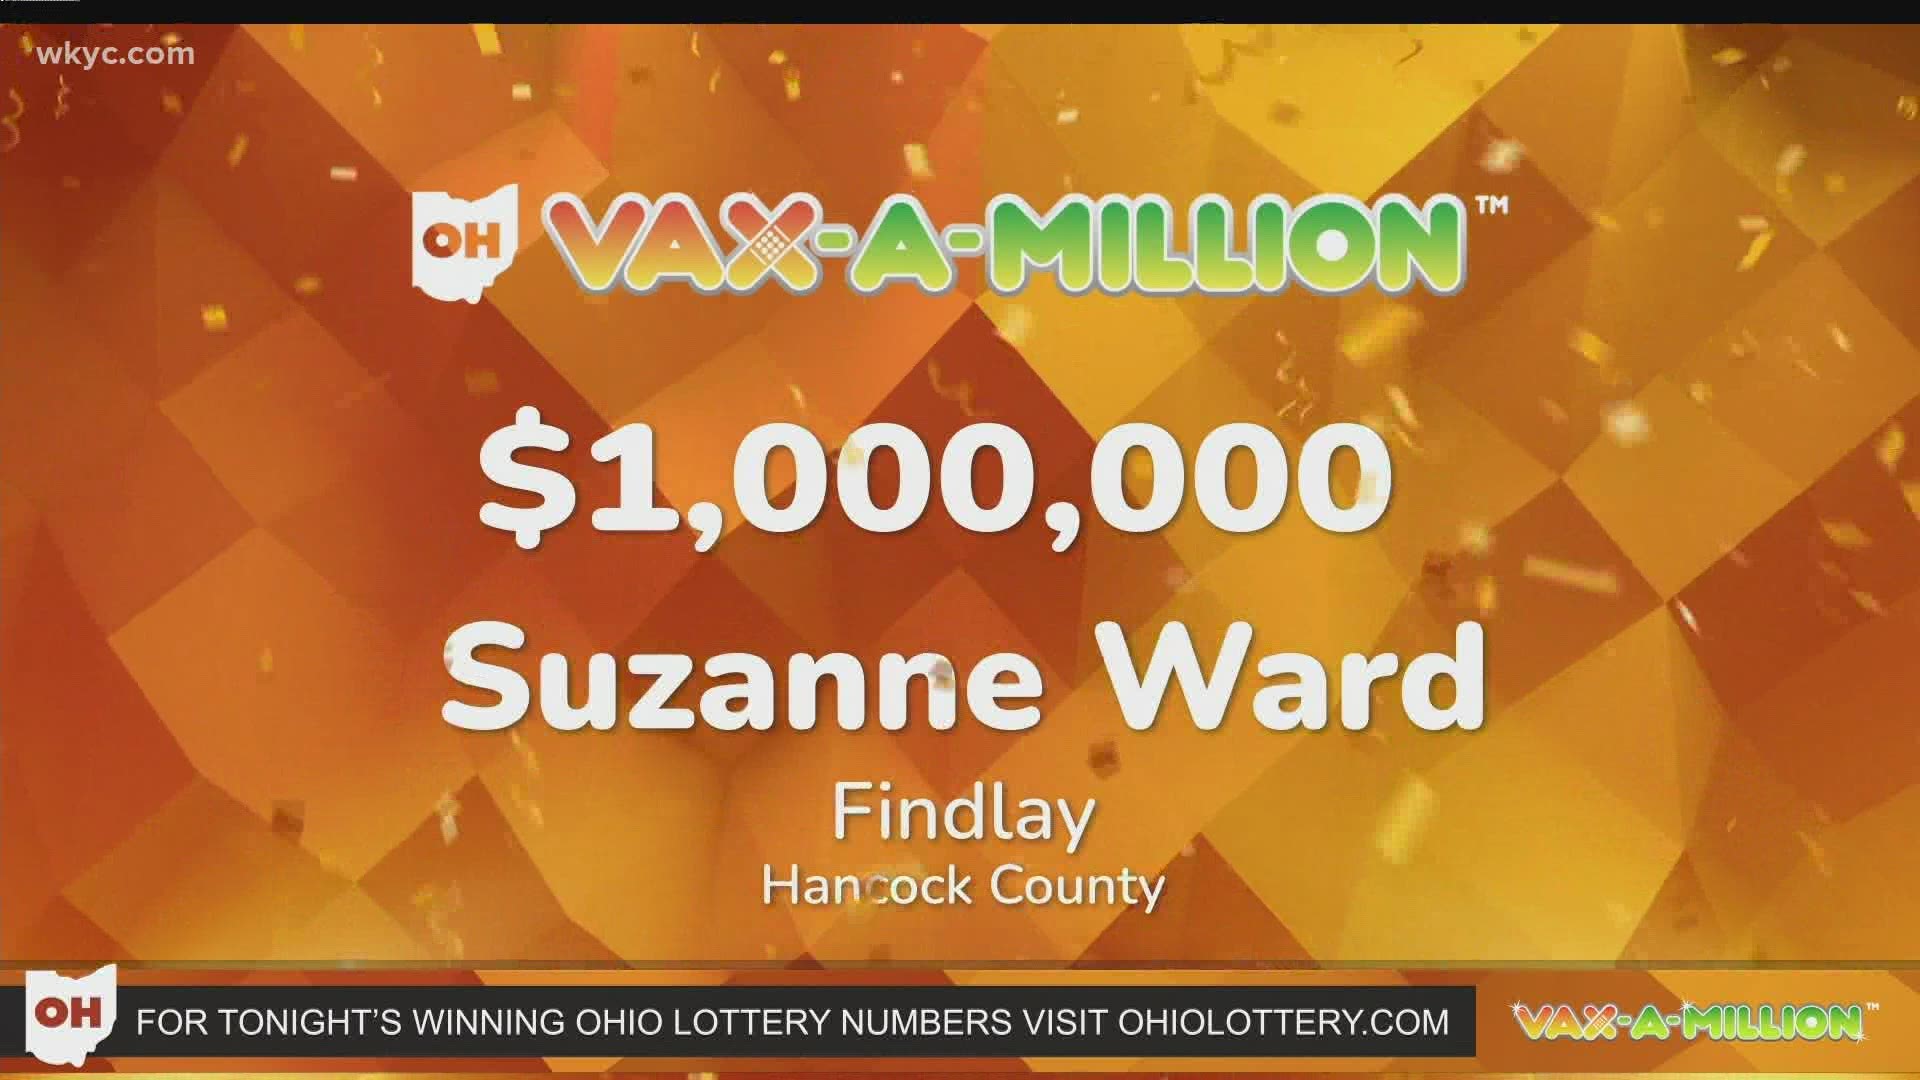 Suzanne Ward from Findlay took home $1 million, while Cincinnati's Sean Horning earned a full college scholarship.